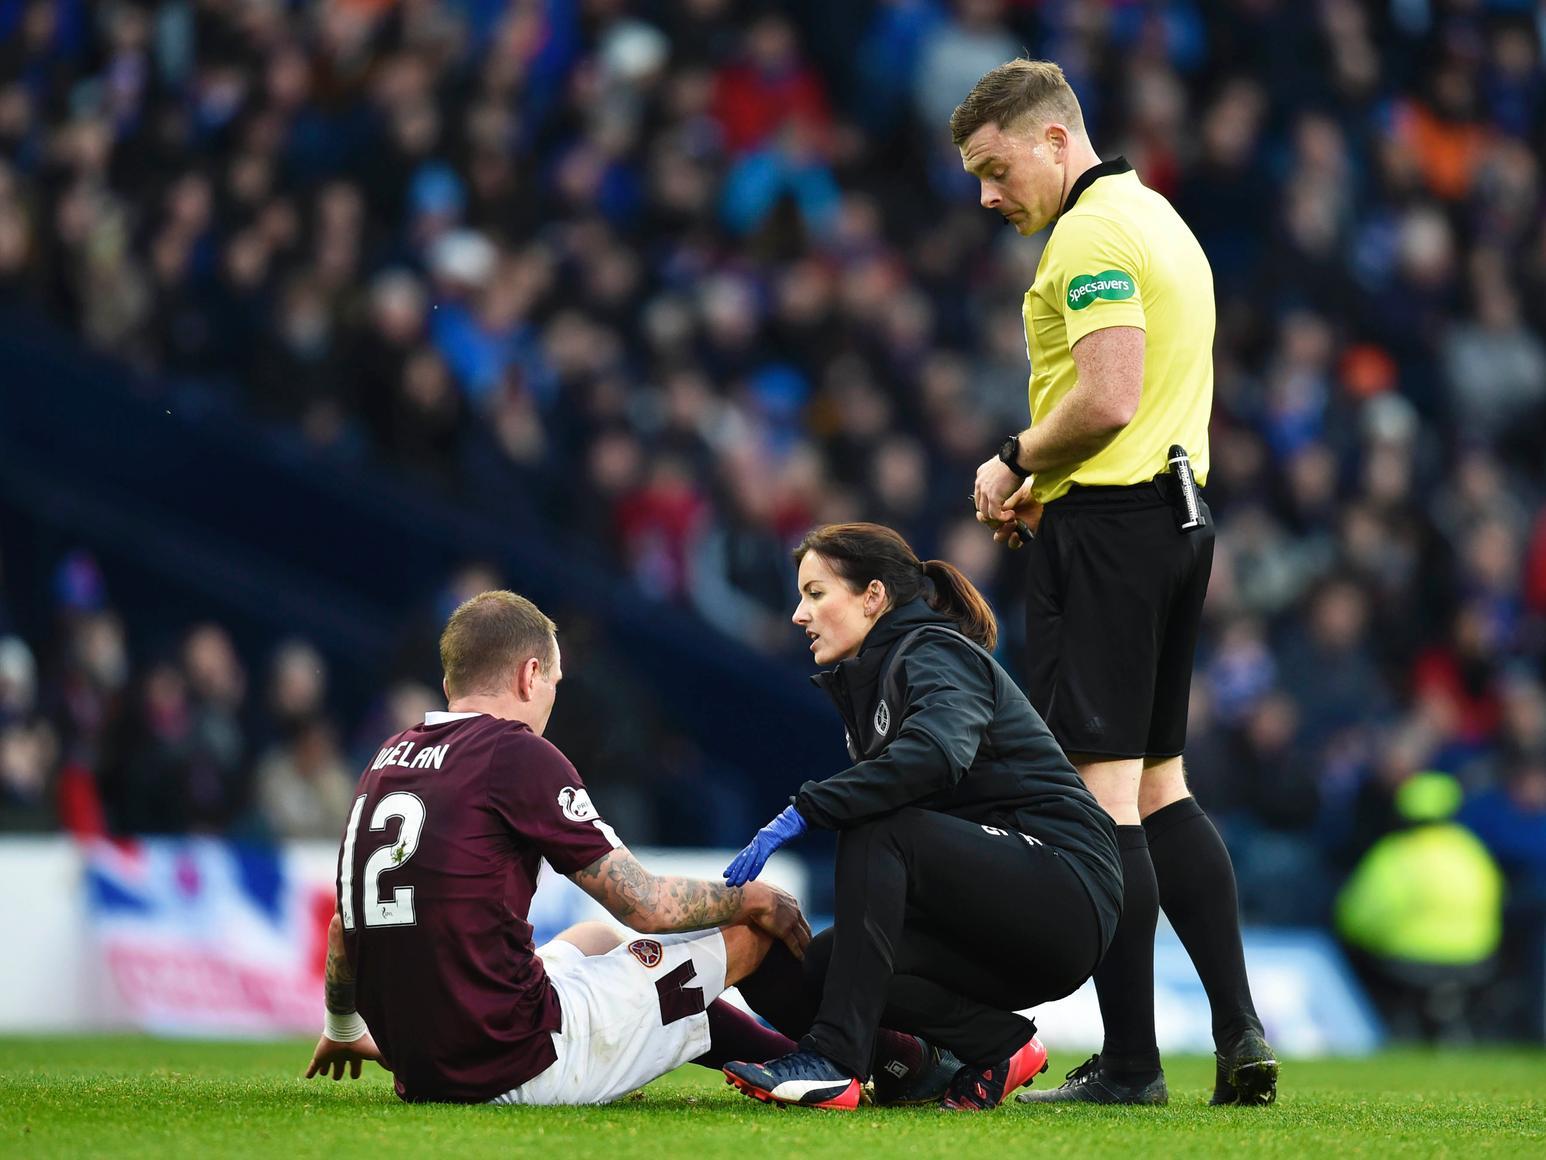 A key presence for Hearts in the early stages as he helped the team keep their shape before succumbing to a hamstring injury midway through first half.